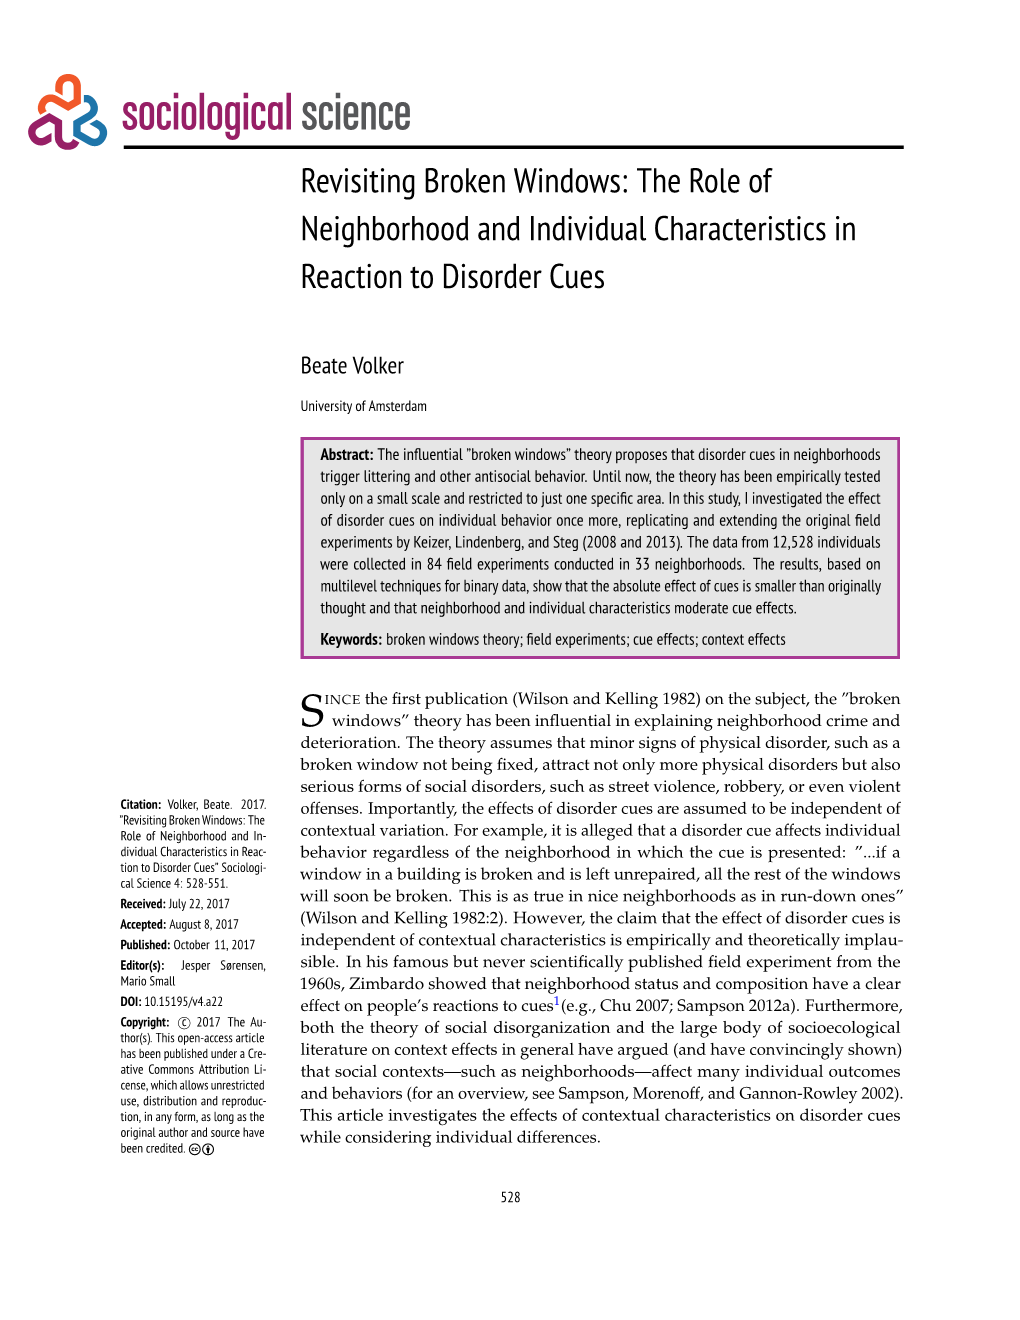 Revisiting Broken Windows: the Role of Neighborhood and Individual Characteristics in Reaction to Disorder Cues